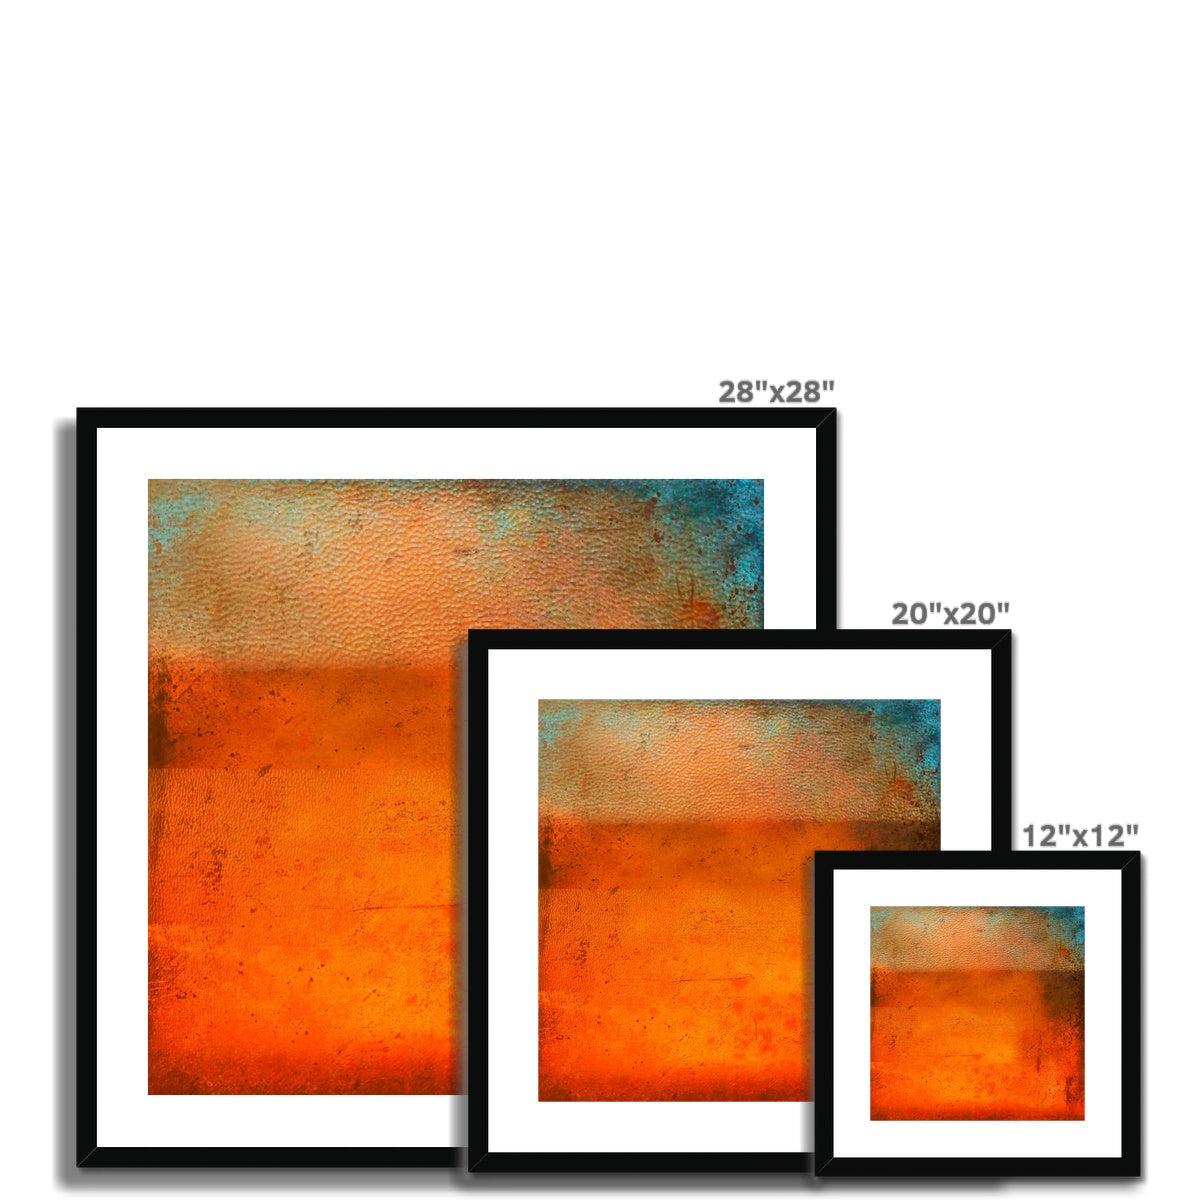 Sunset Horizon Abstract Painting | Framed & Mounted Prints From Scotland-Framed & Mounted Prints-Abstract & Impressionistic Art Gallery-Paintings, Prints, Homeware, Art Gifts From Scotland By Scottish Artist Kevin Hunter